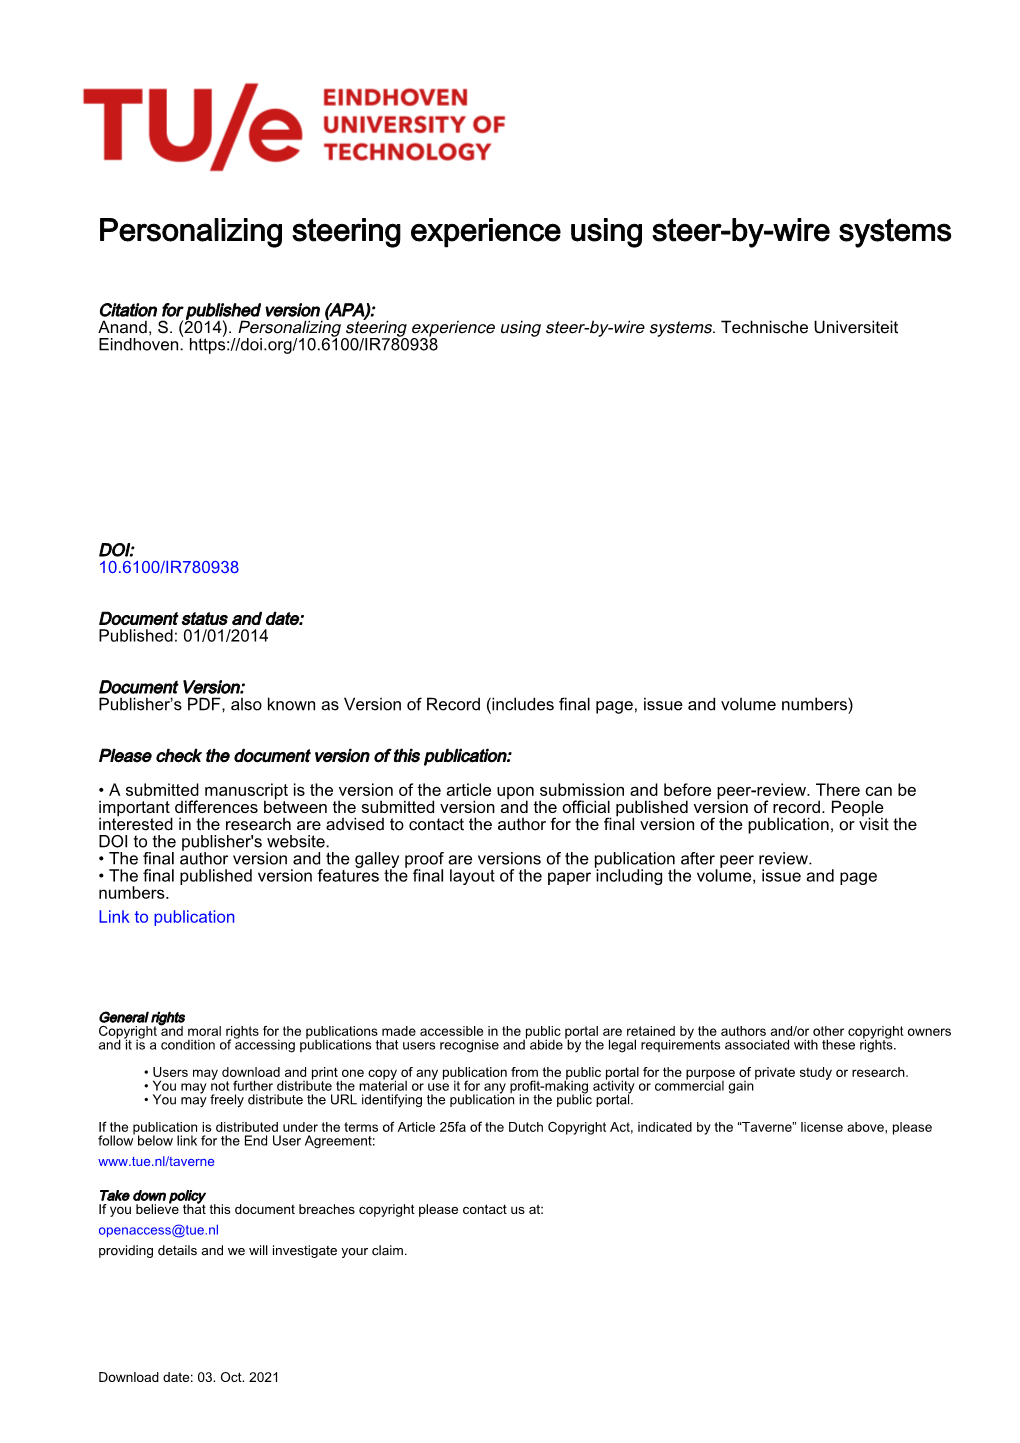 Personalizing Steering Experience Using Steer-By-Wire Systems